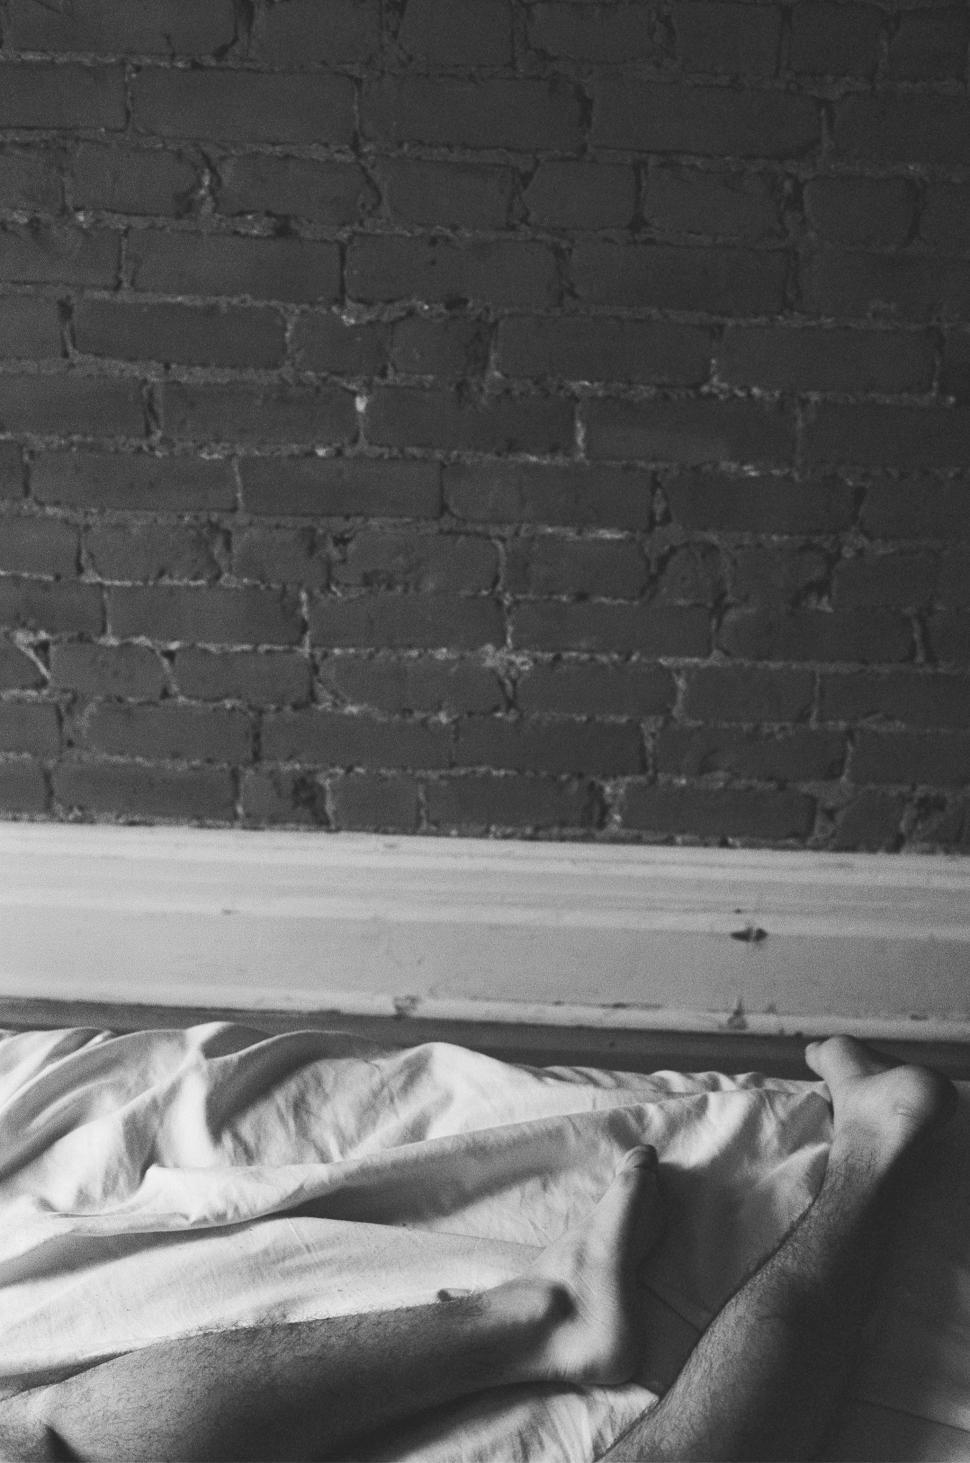 Free Image of Unmade Bed With Brick Wall Background 